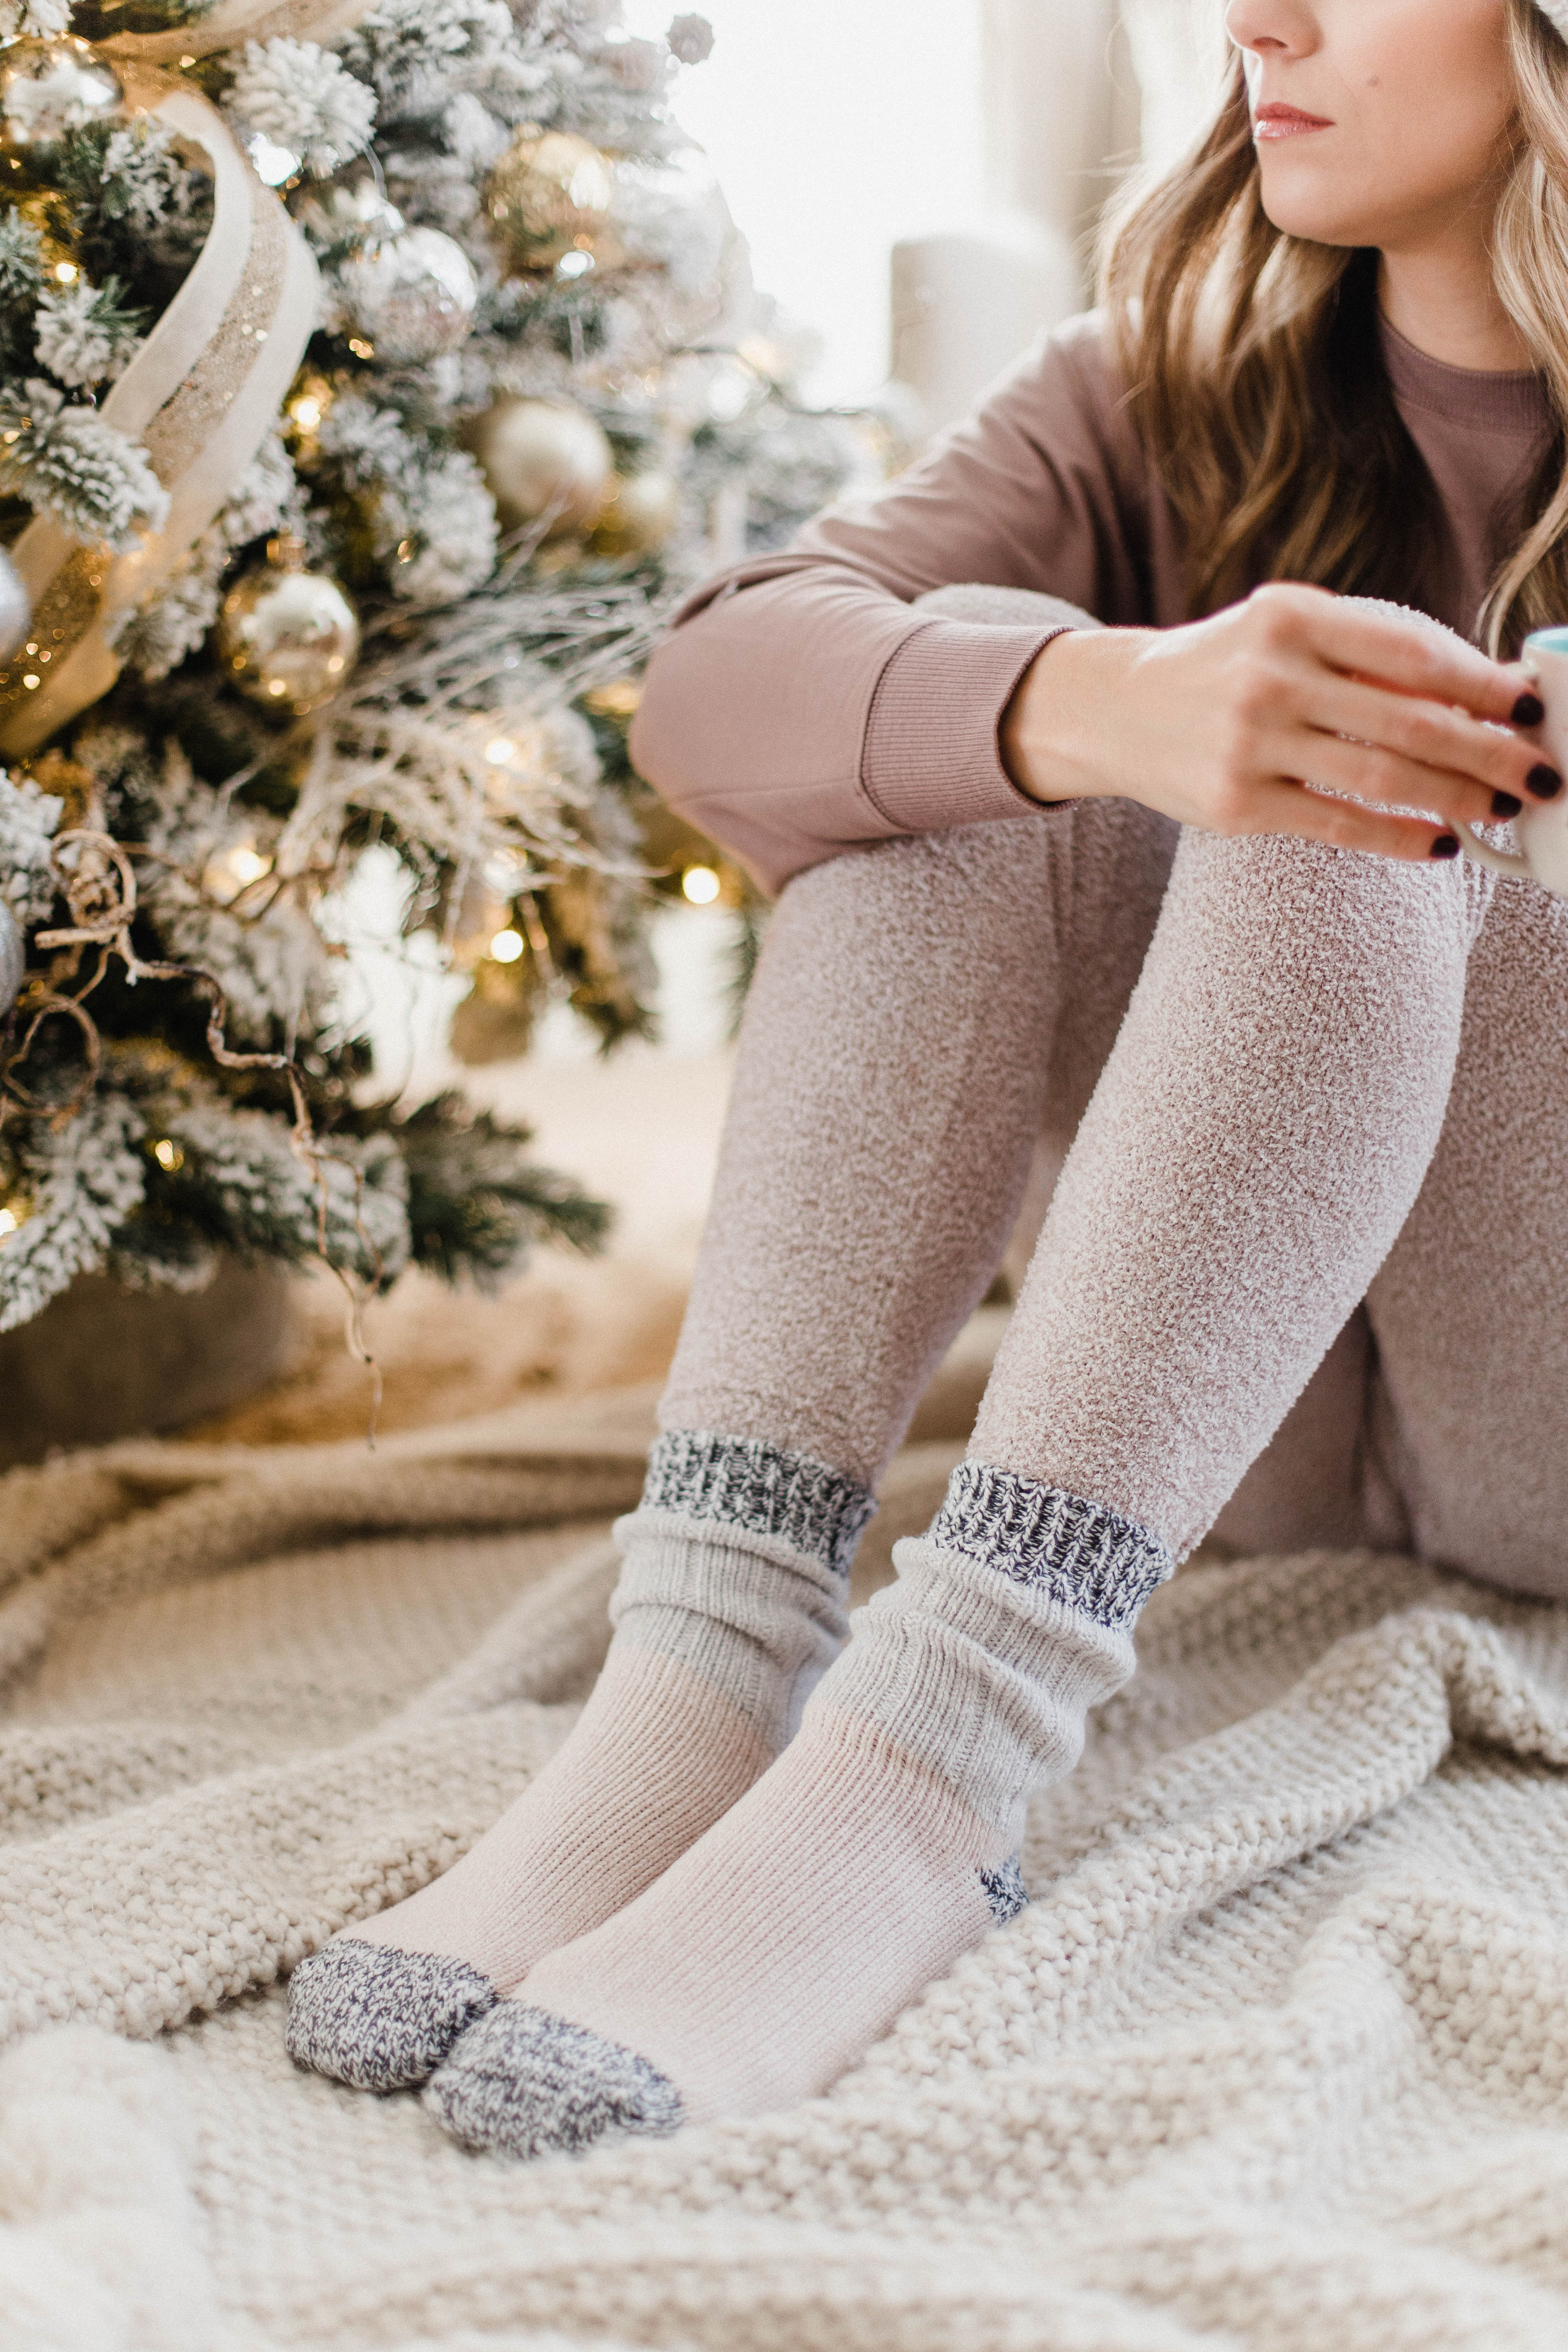 Connecticut life and style blogger Lauren McBride shares some cozy holiday loungewear and where to find it during Express's Black Friday Sale.